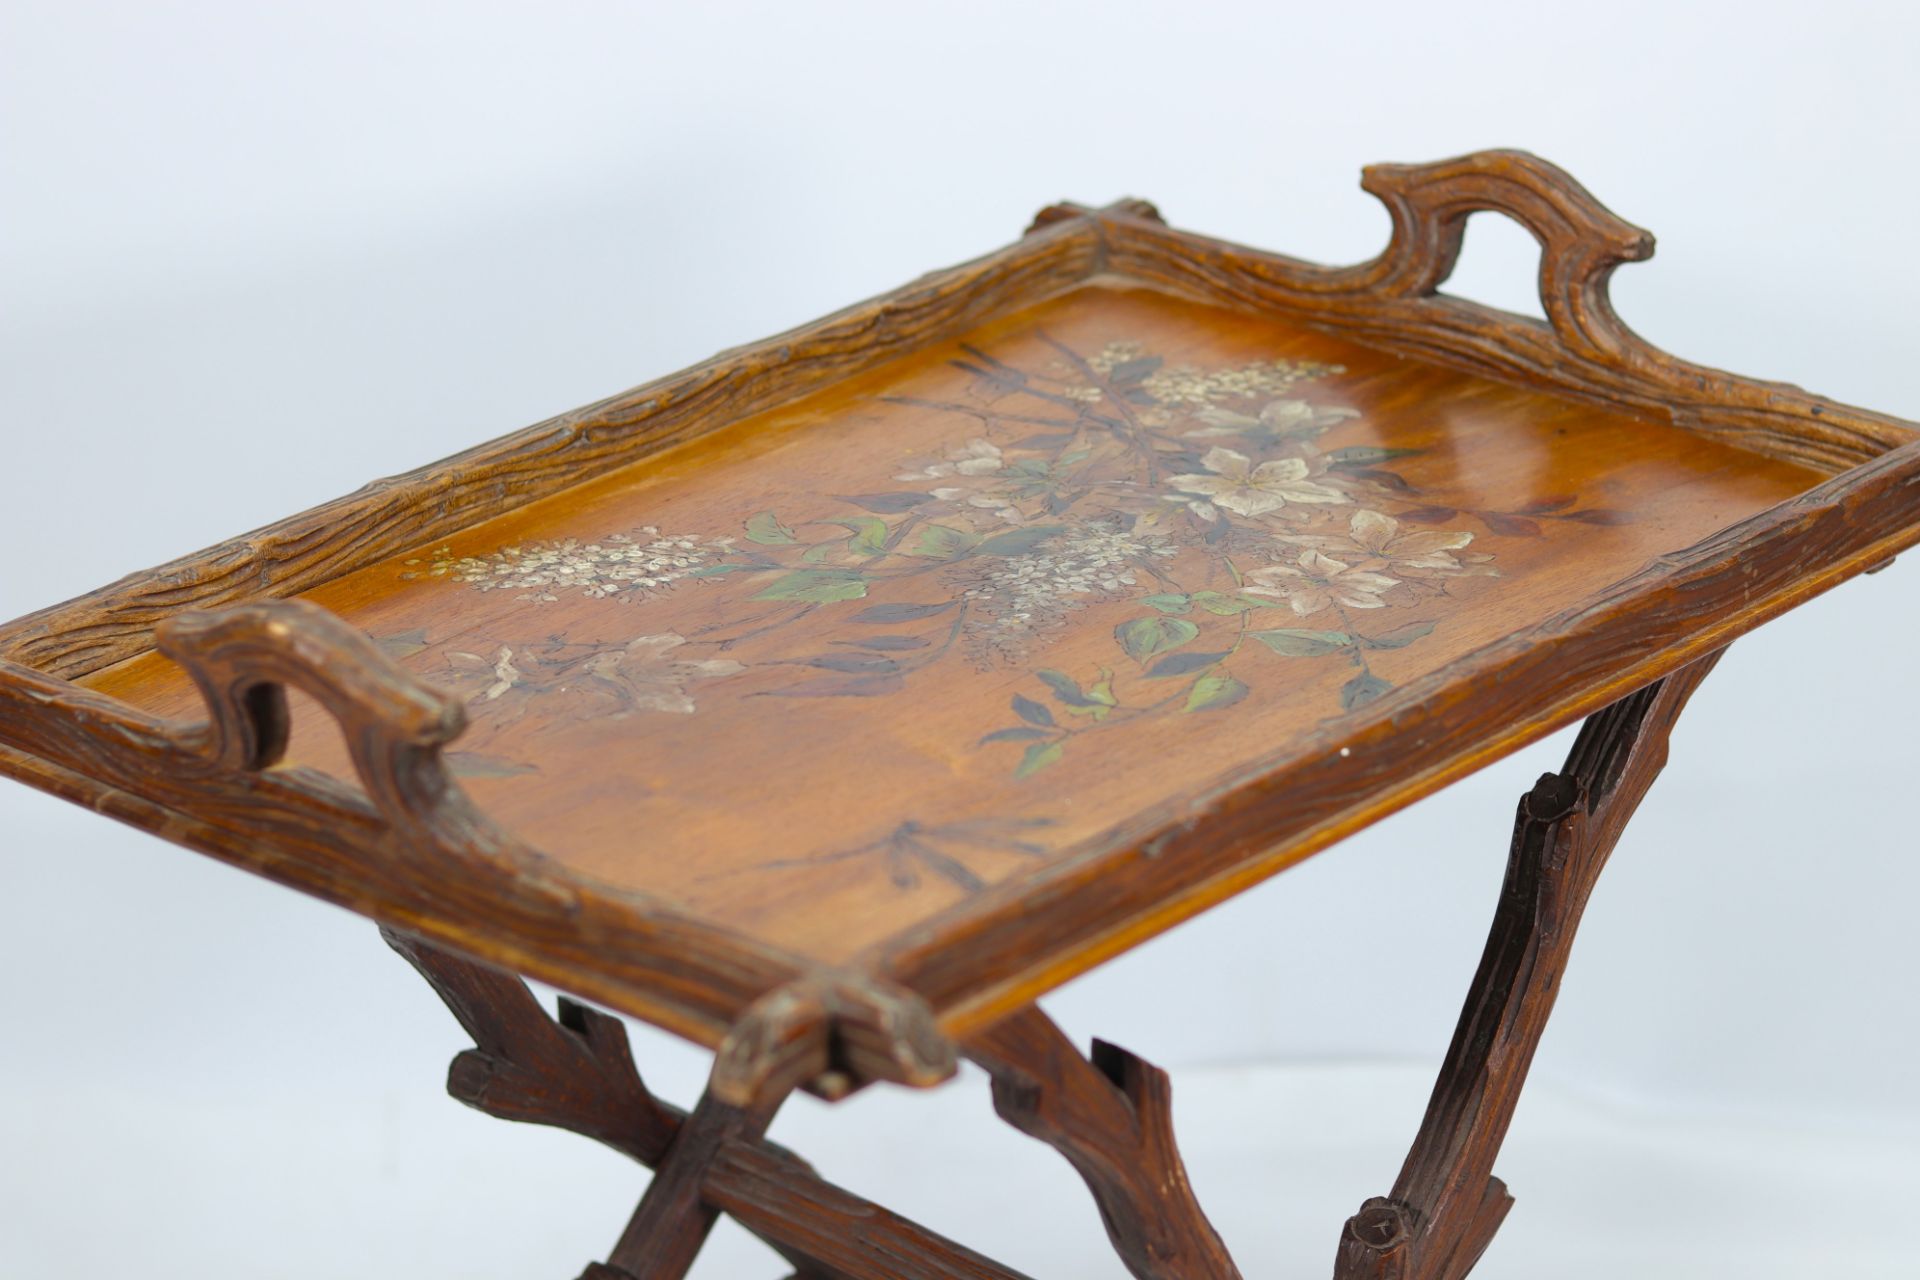 Black Forest tea tray with floral and dragonfly decoration, signed and dated 1901. - Image 3 of 5